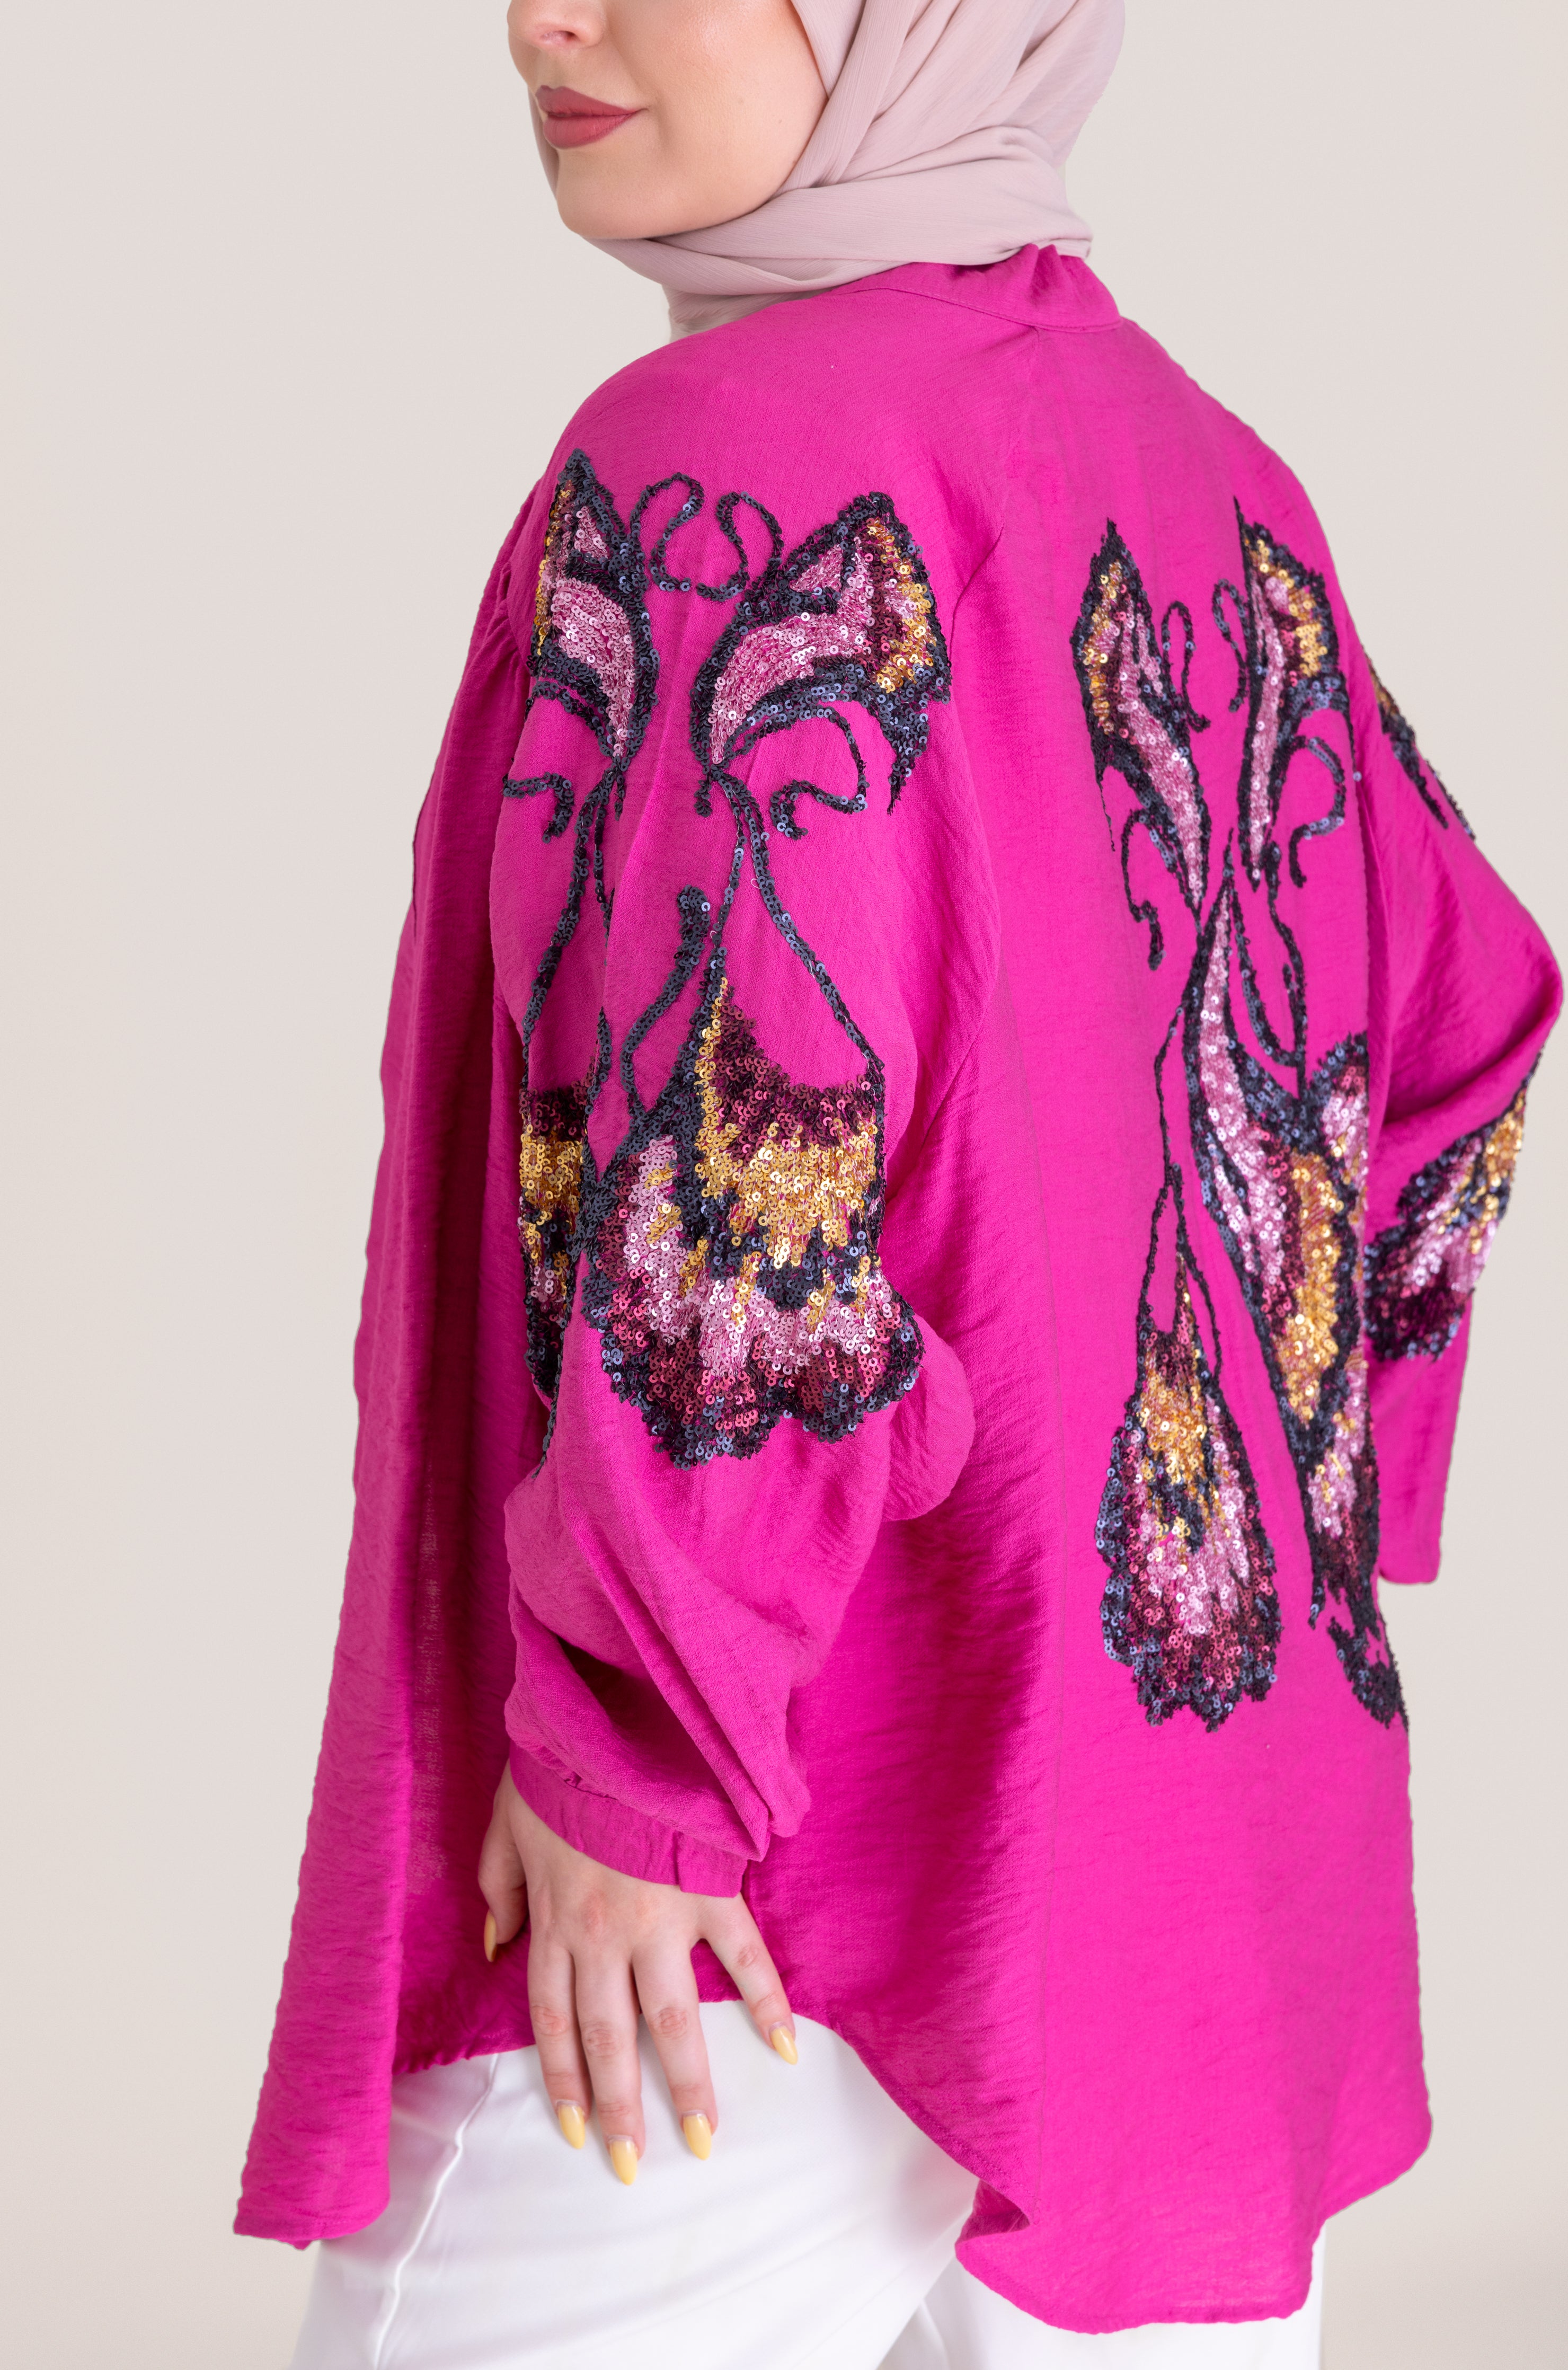 Embroidered Butterfly Cardigan - Fuchsia Pink